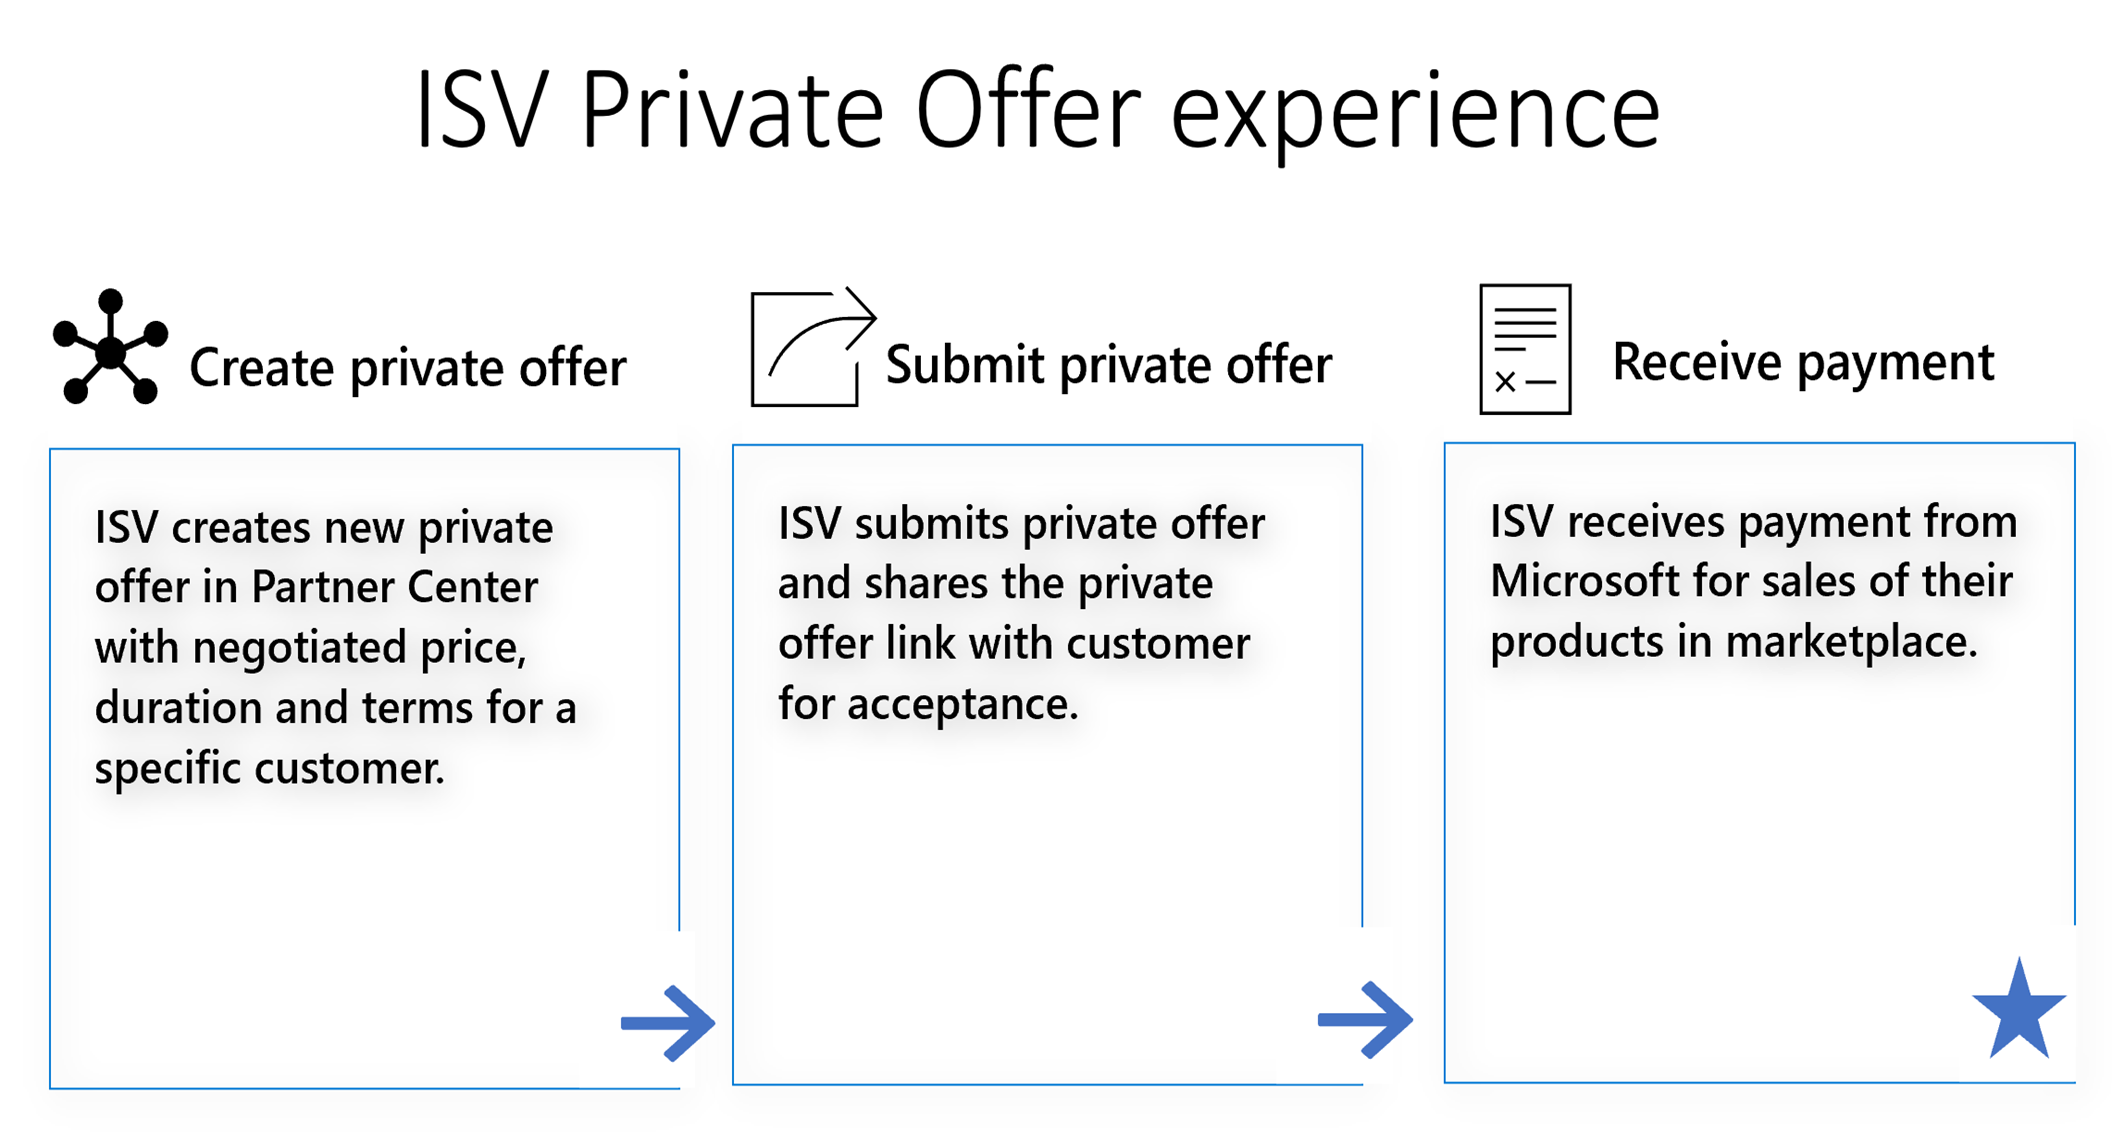 Shows the progression of the ISV private offer experience with customers.